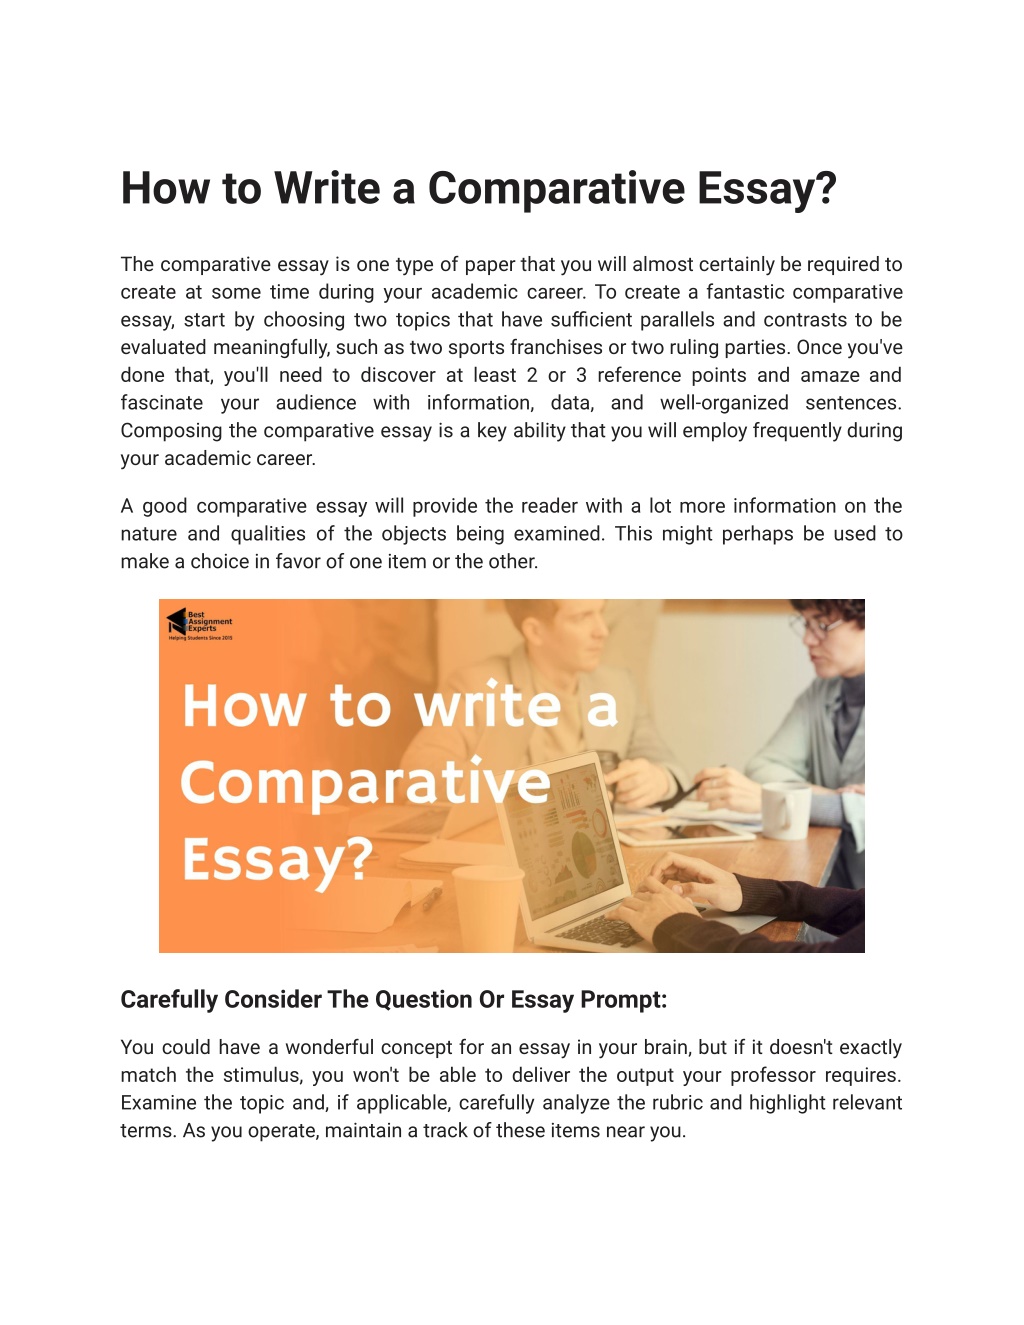 how to write a comparative essay title